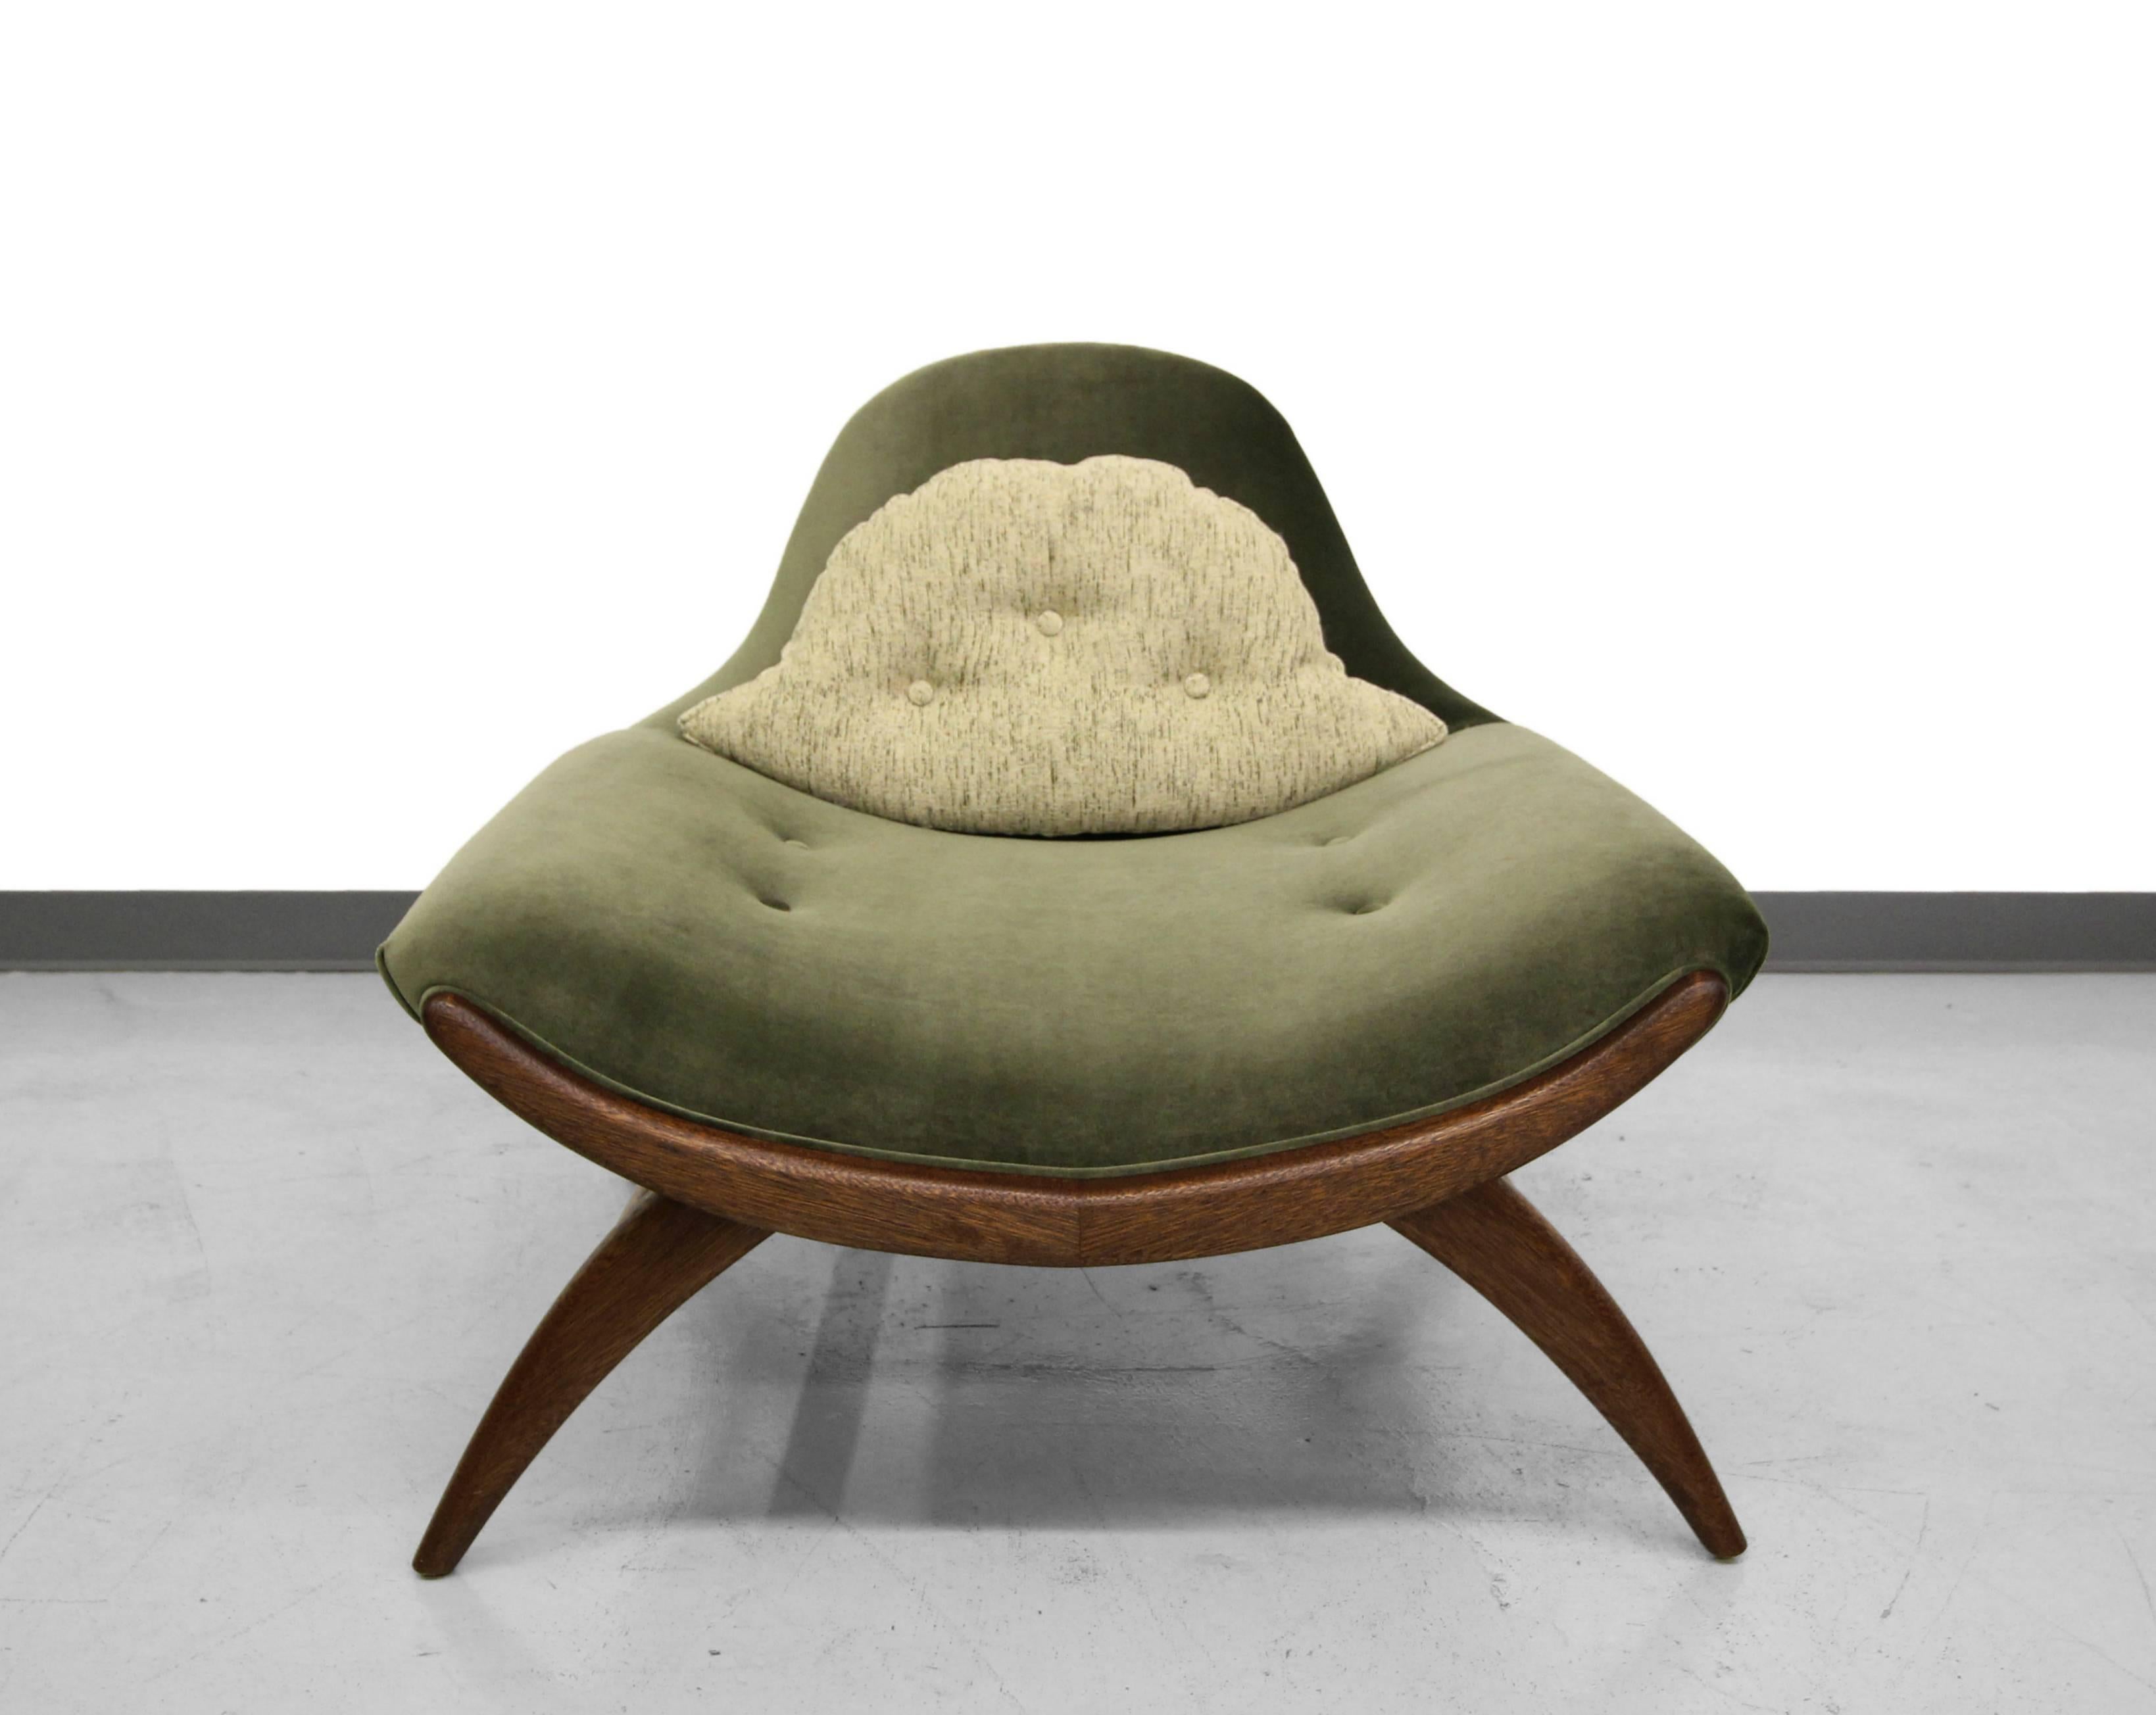 Perfect Mid-Century Gondola chair. Amazing lines and details make it a real show stopper. Supported by a perfectly sculpted walnut tone base that perfectly compliments it's new, gorgeous dark sage velvet and removable pillow in shades of cream and